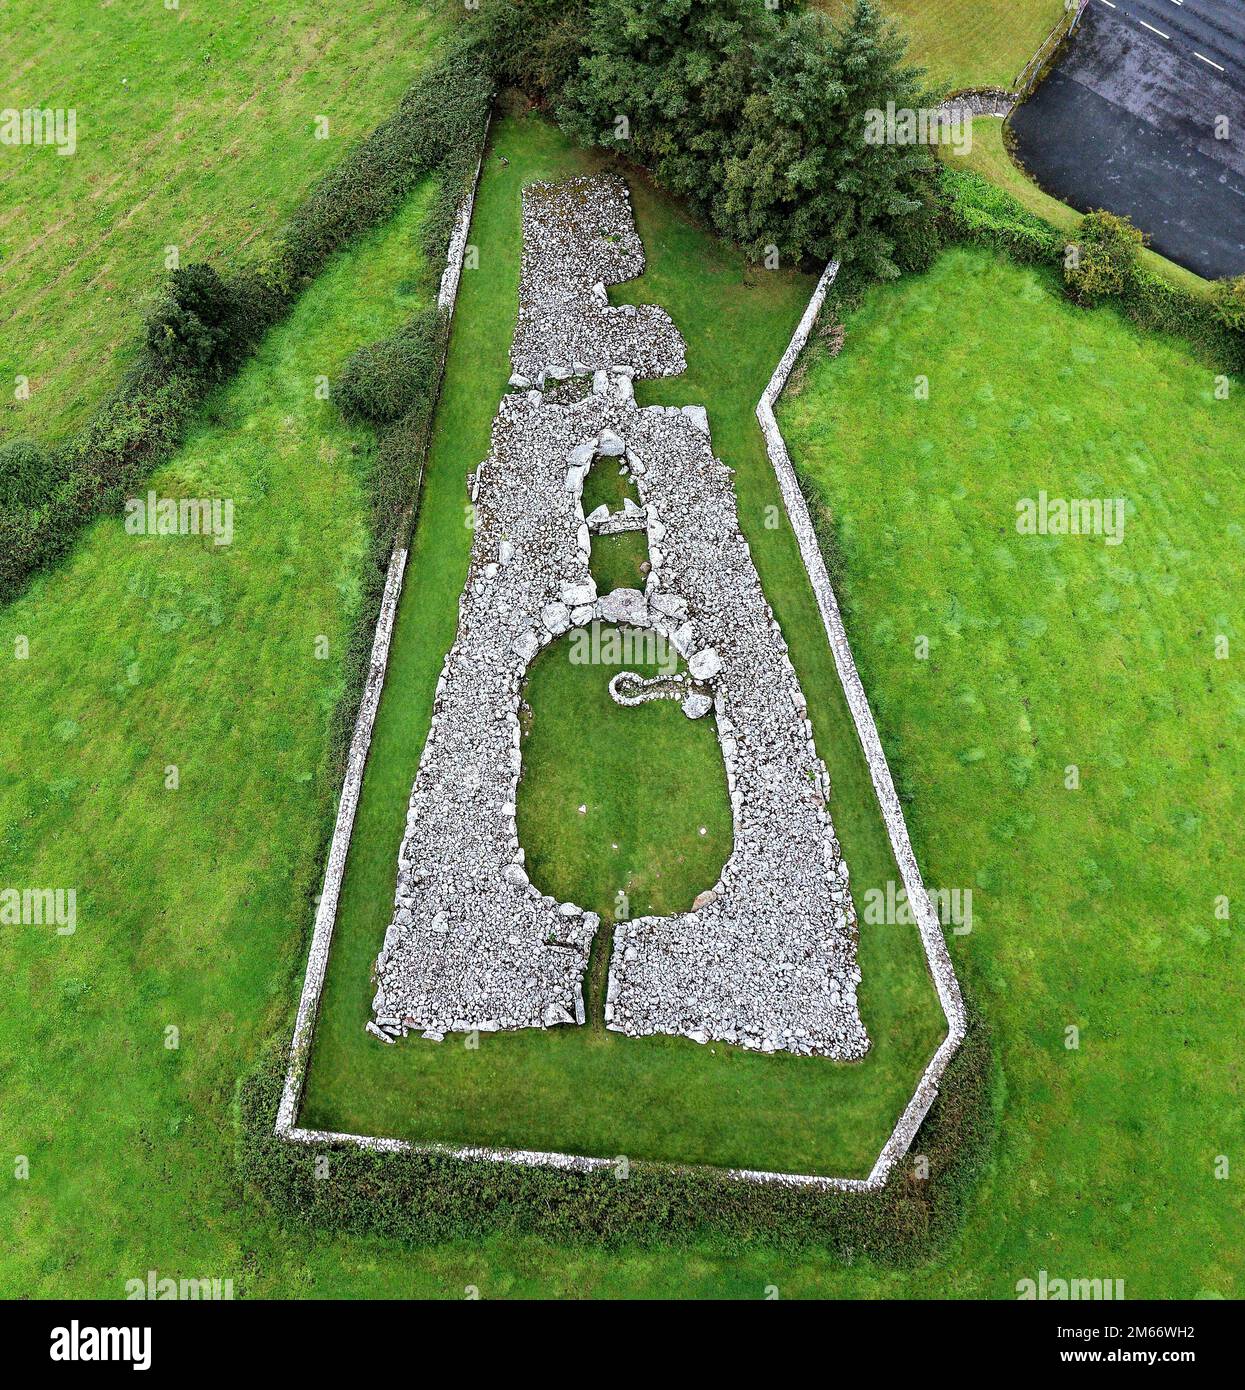 Creevykeel prehistoric Neolithic court cairn burial chamber complex near Cliffony, County Sligo, Ireland. Between 4500 and 6000 years old Stock Photo